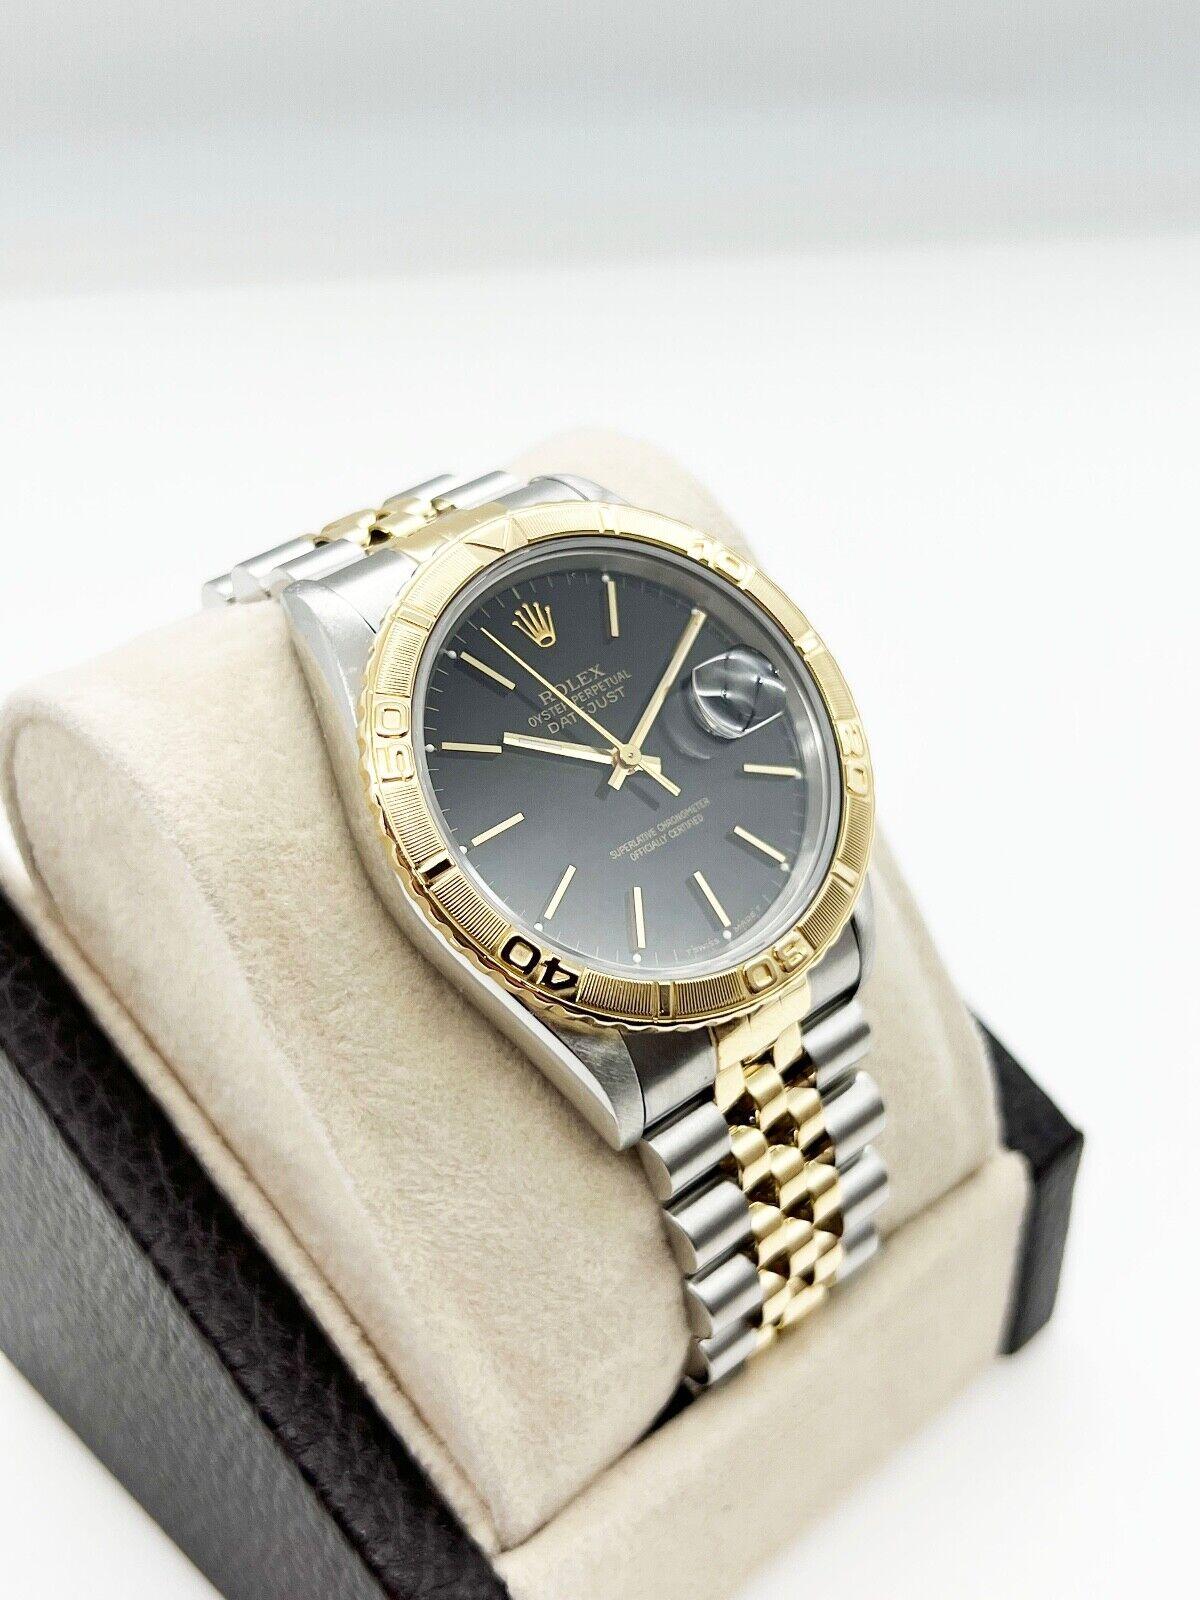 Datejust 16263 Turn-O -Graph Black Dial 18K Yellow Gold & Stainless Steel In Good Condition For Sale In San Diego, CA